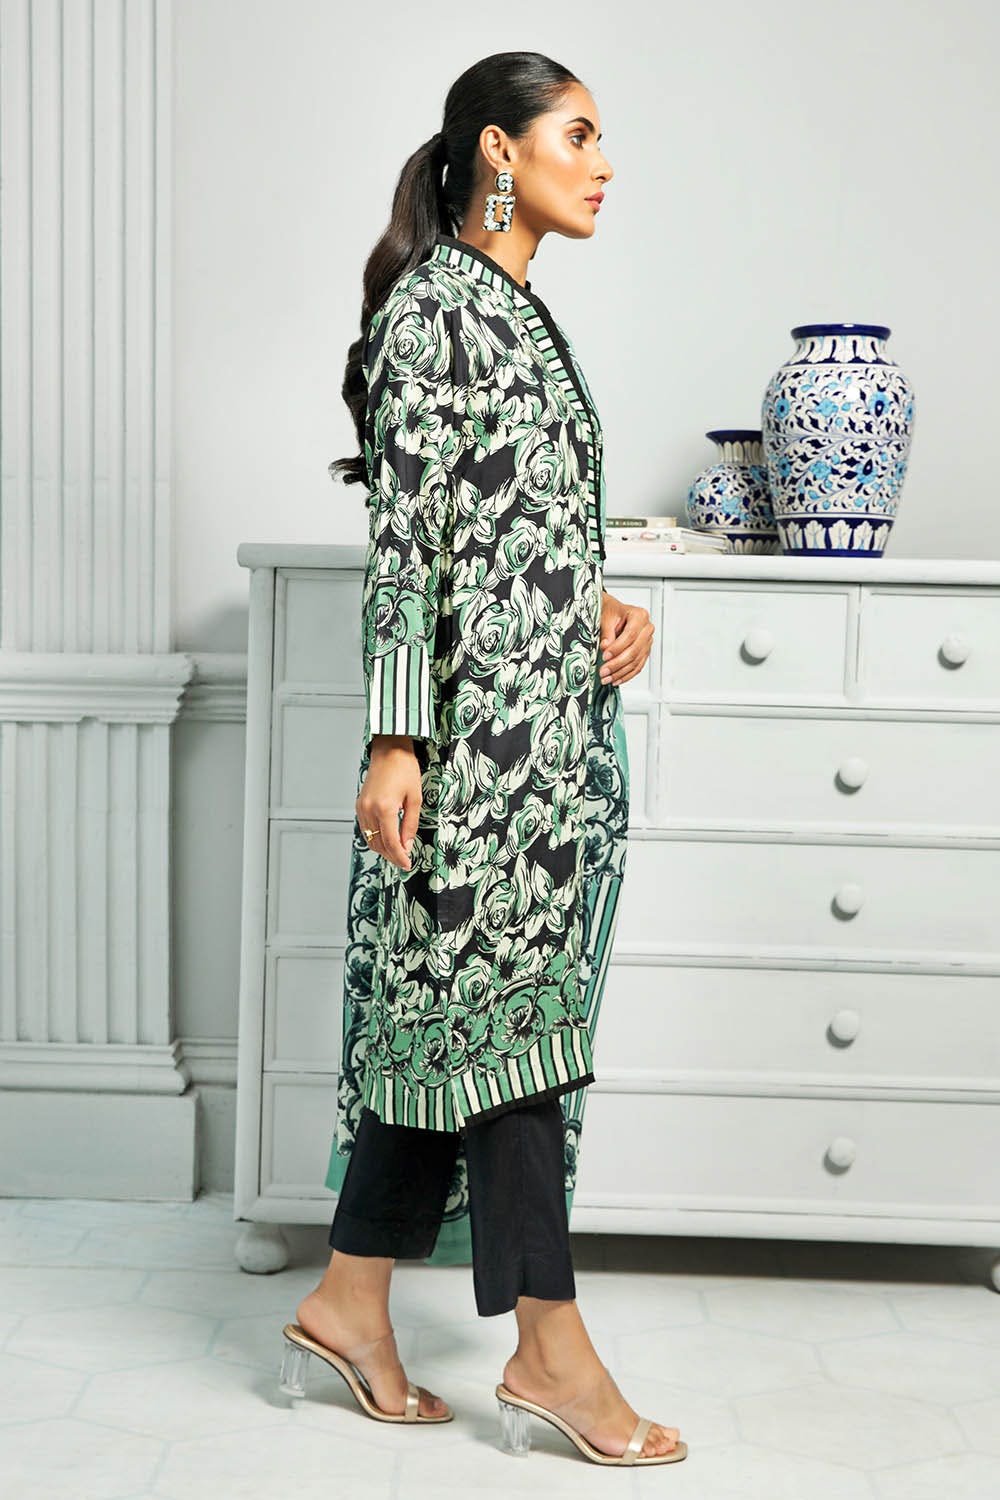 Gul Ahmed 3PC Linen Shawl Printed Stitched Suit WNS-12086